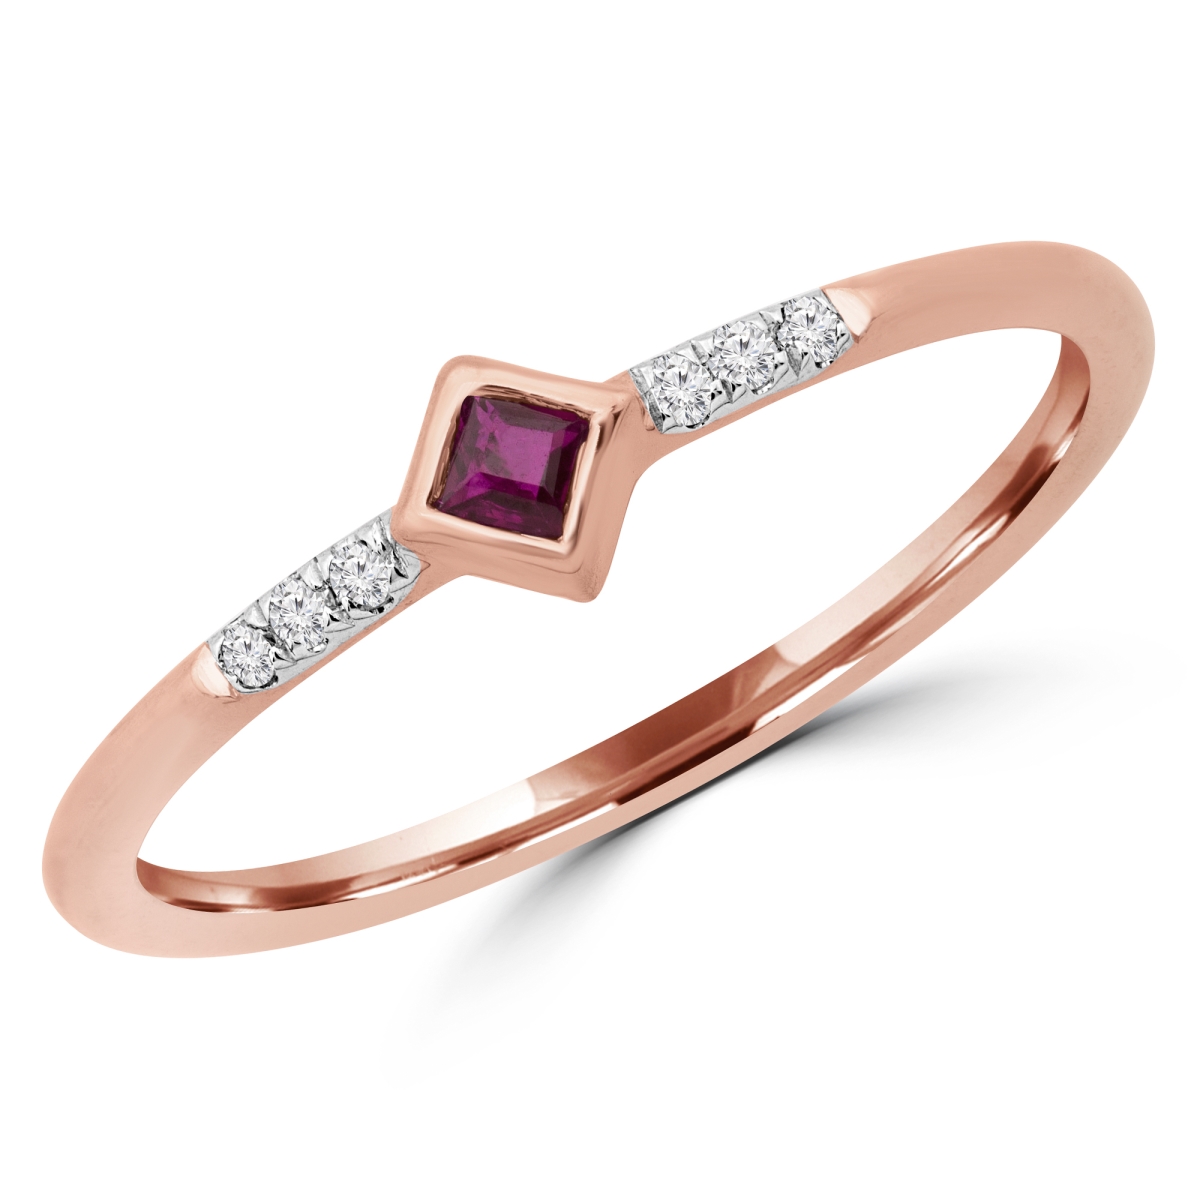 Picture of Majesty Diamonds MDR190078-7.5 0.1 CTW Round Red Ruby Bezel Set Cocktail Ring in 14K Rose Gold - Size 7.5